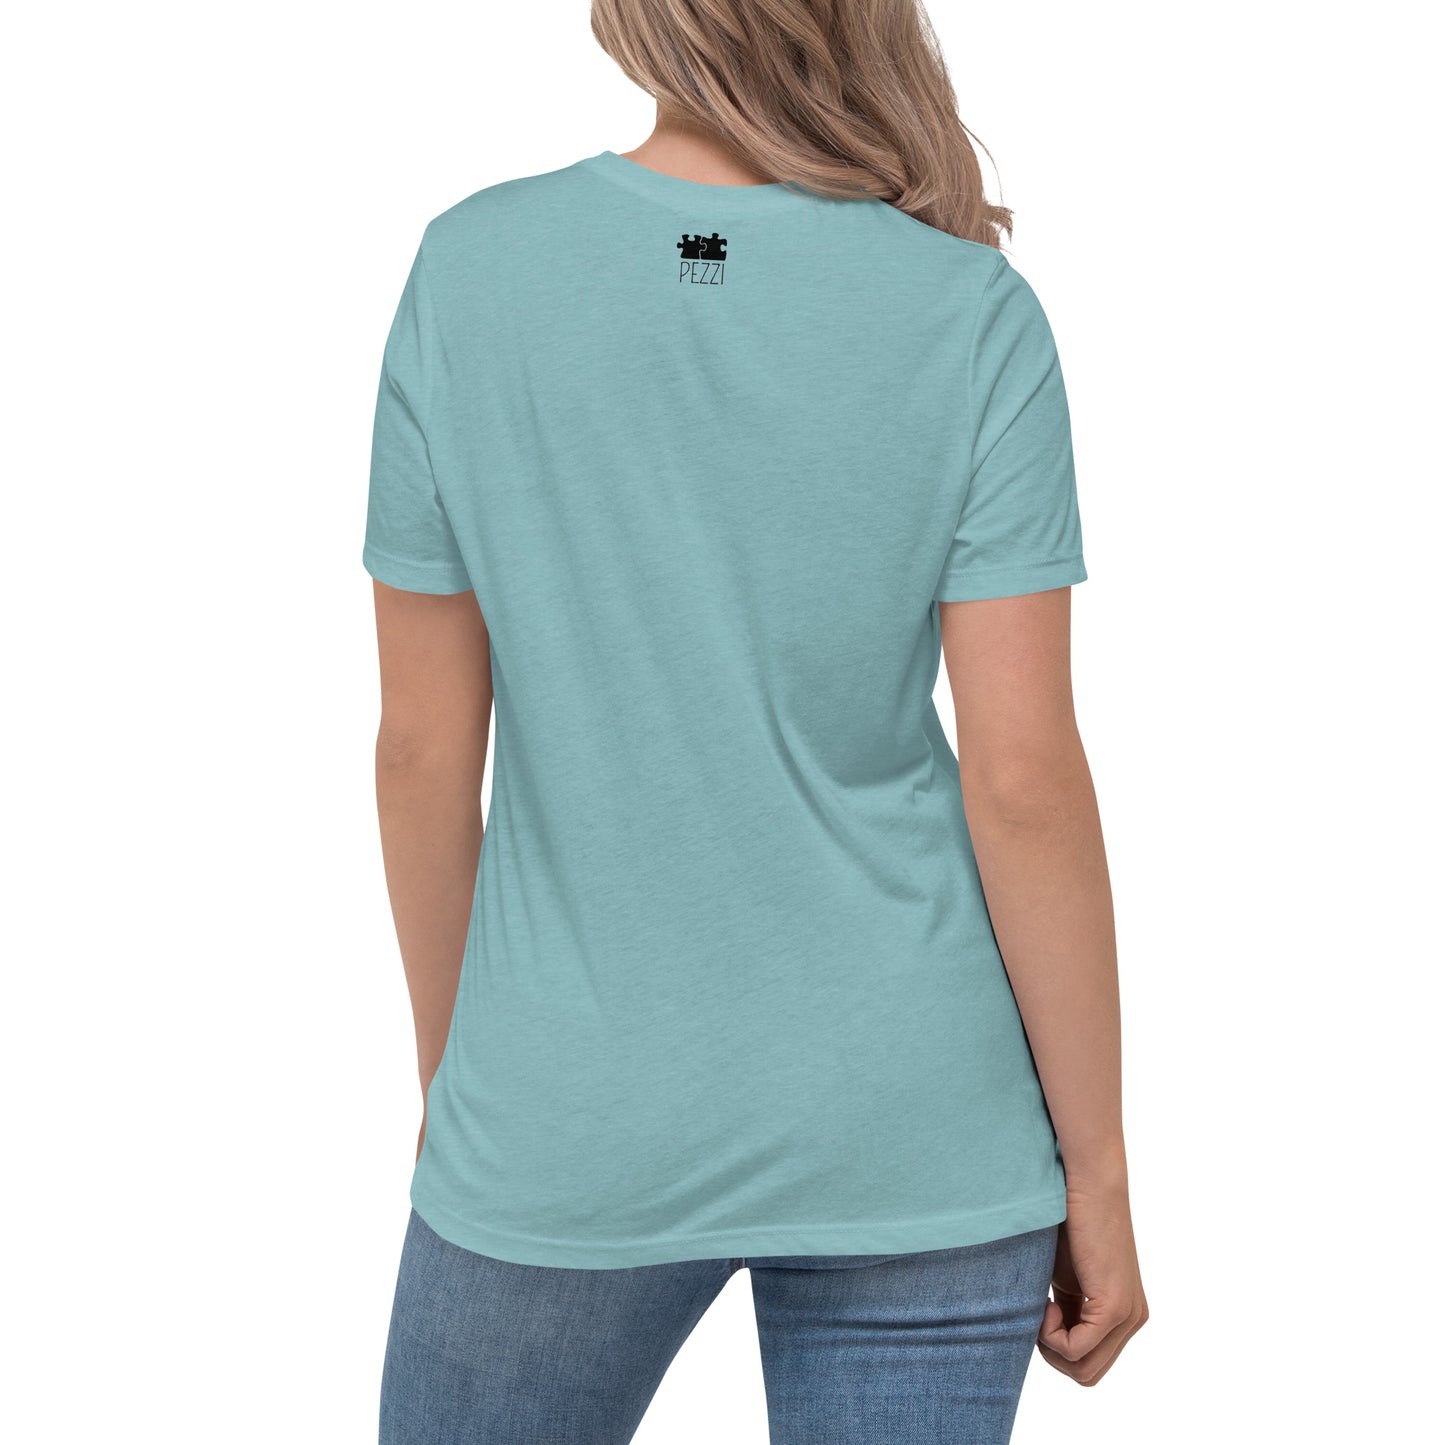 Cannolo on a Women's Relaxed T-Shirt